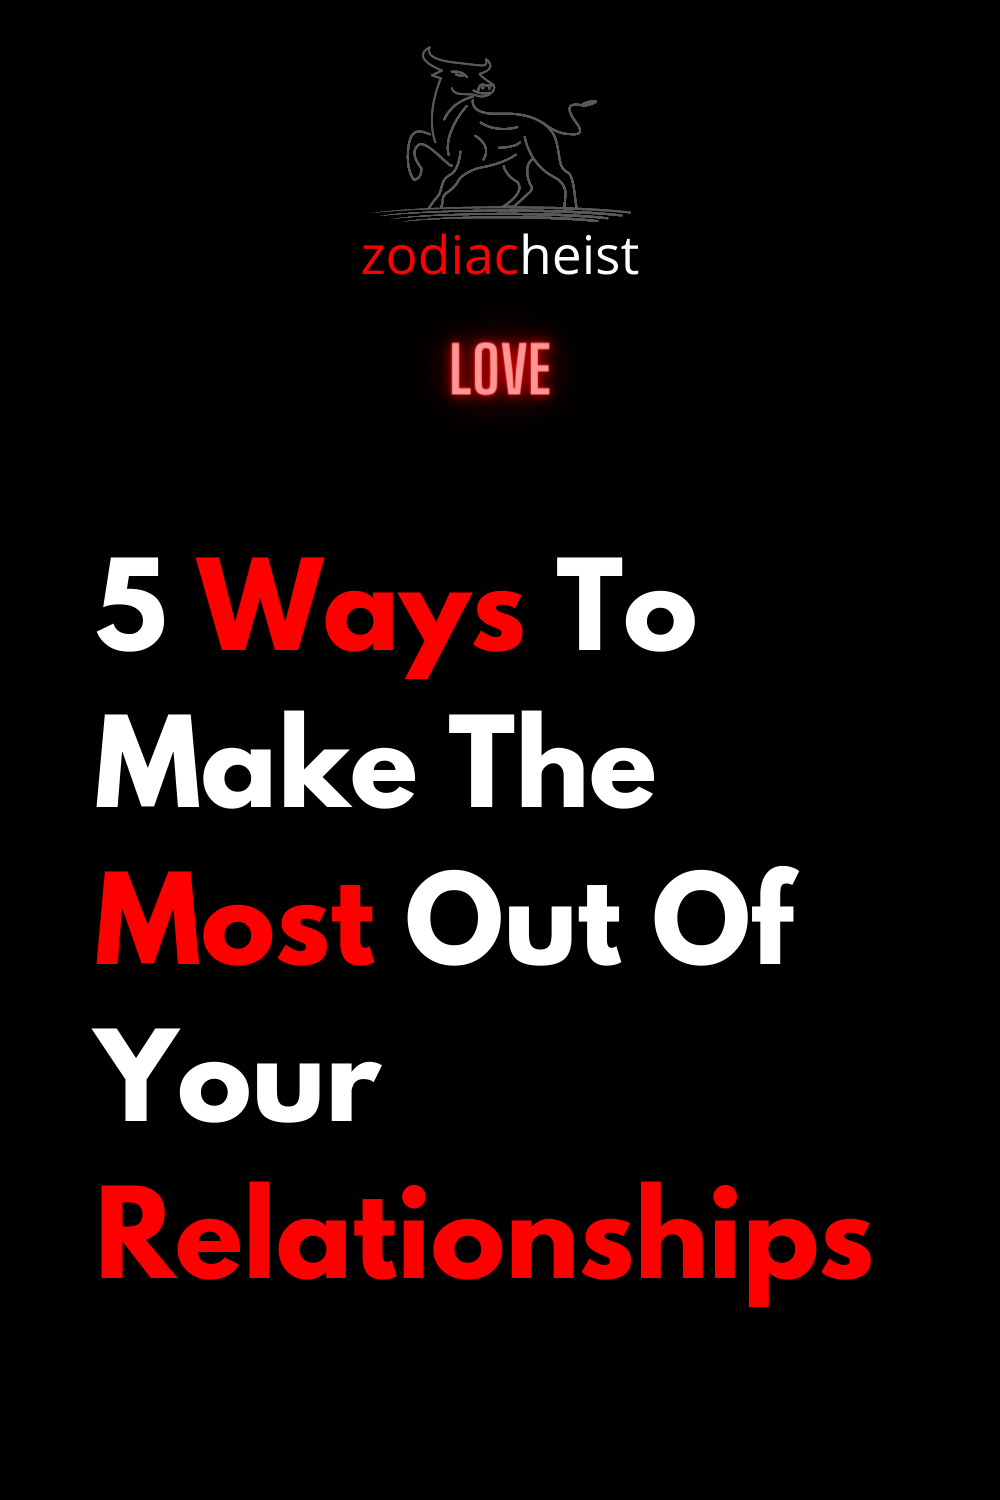 5 Ways To Make The Most Out Of Your Relationships